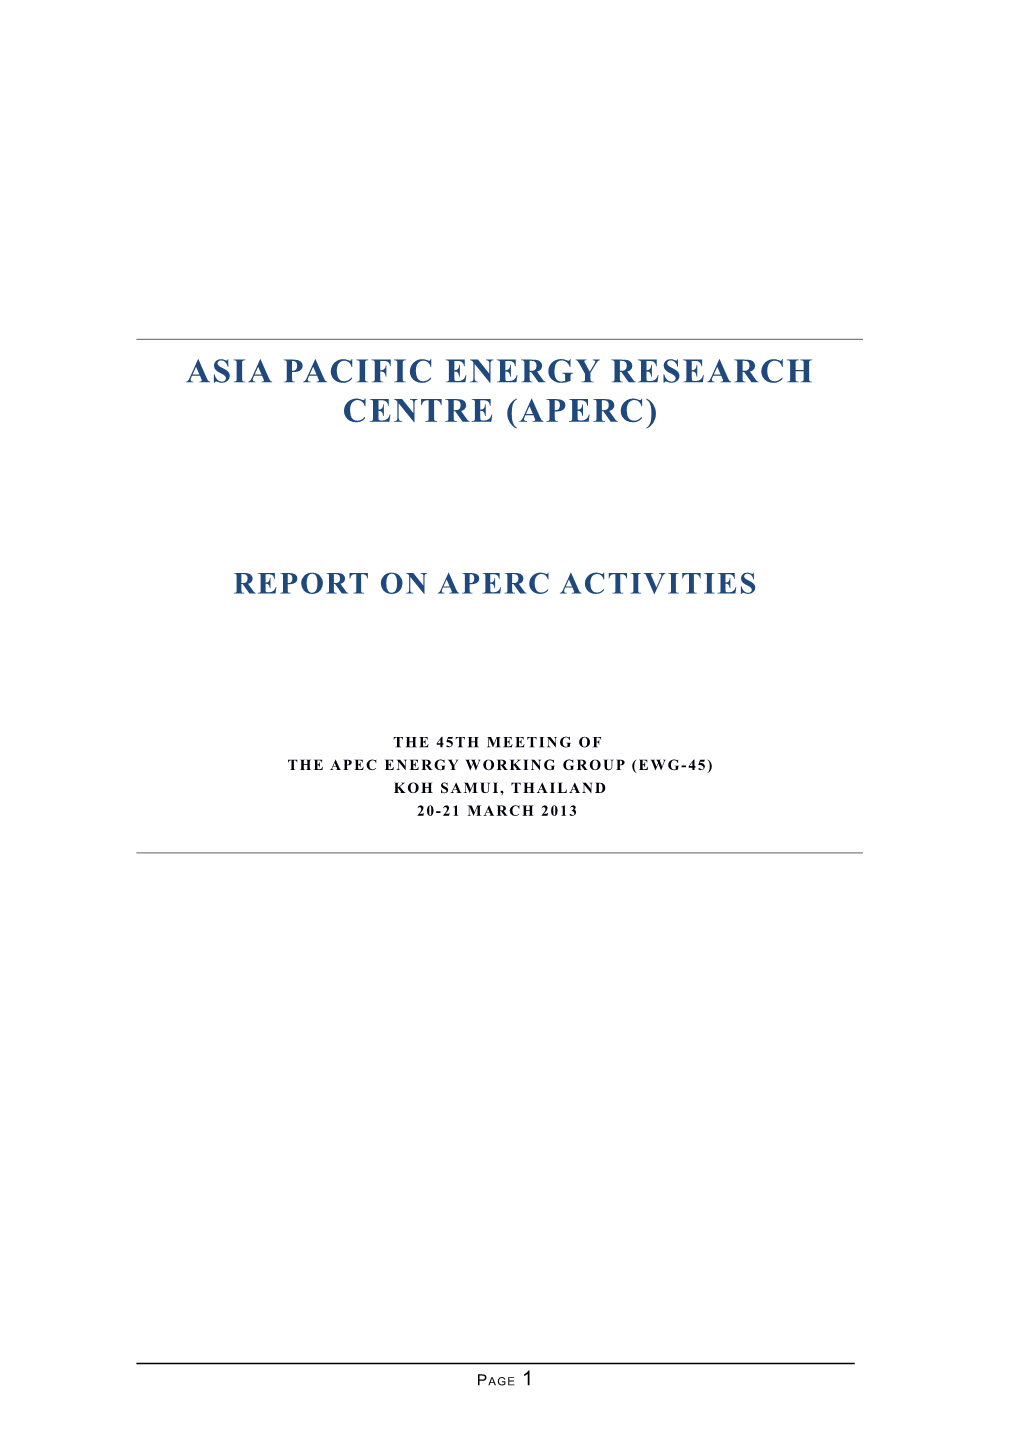 Asia Pacific Energy Research Centre (APERC)